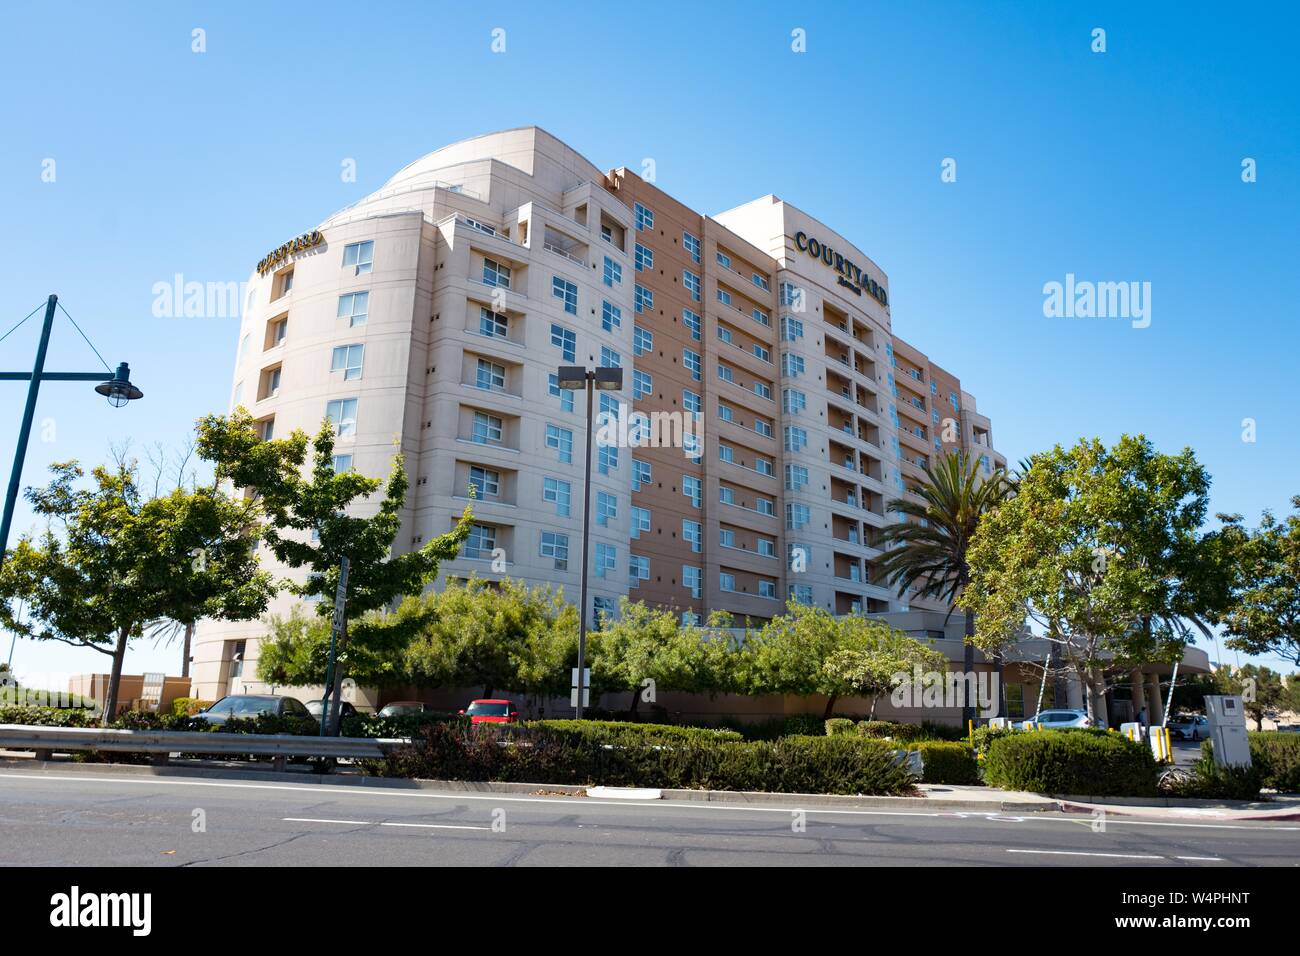 Low-angle view of Courtyard Marriott hotel in Emeryville, California, a popular option for travelers to San Francisco, September 18, 2018. () Stock Photo